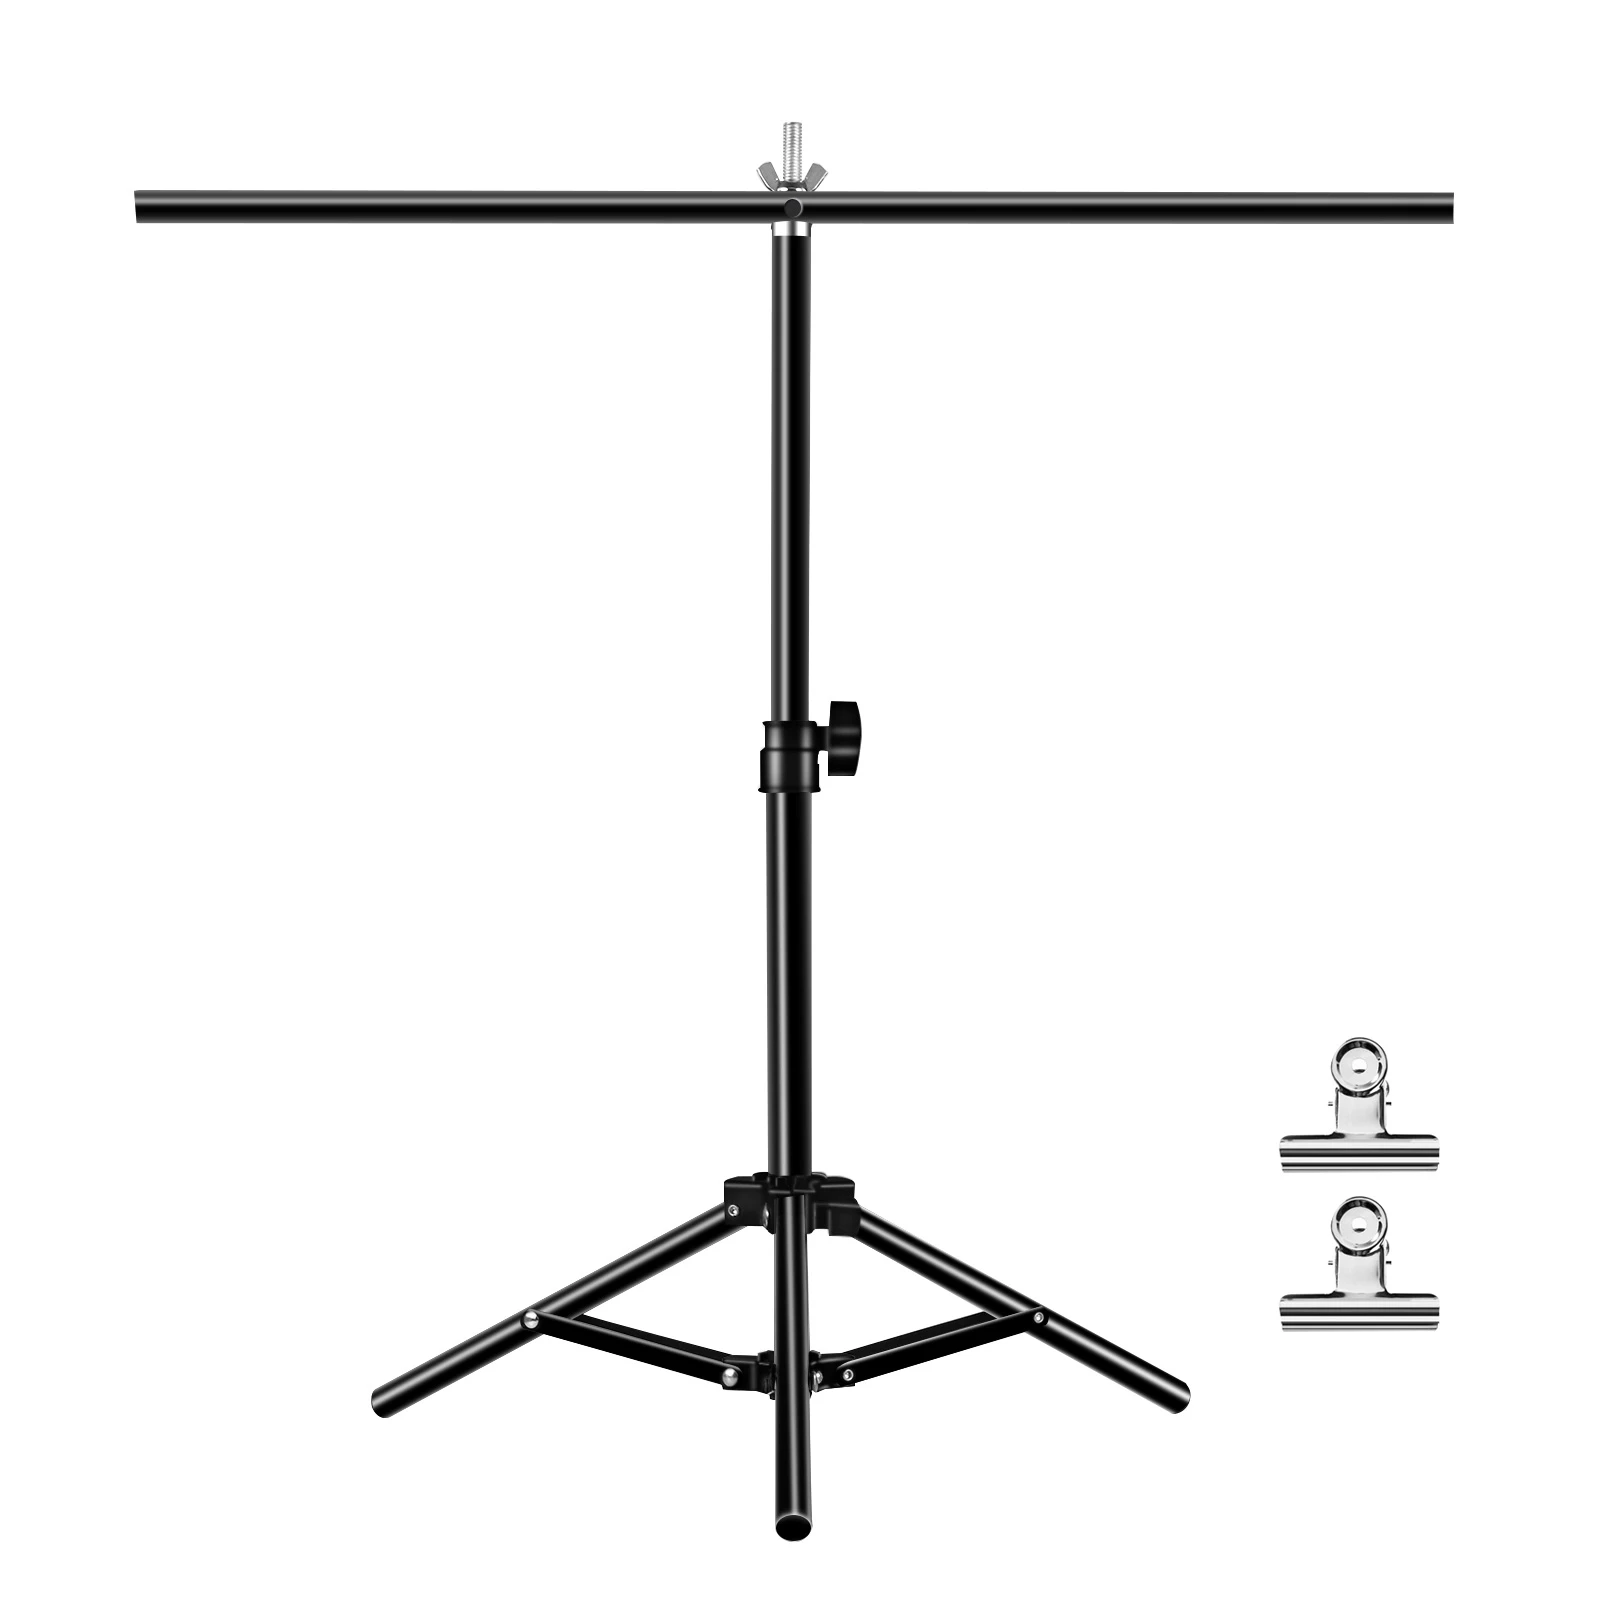 

Wholesale PULUZ 67cm T Shape Photo Studio Background Support Stand Backdrop Crossbar Bracket with Clips, Balck